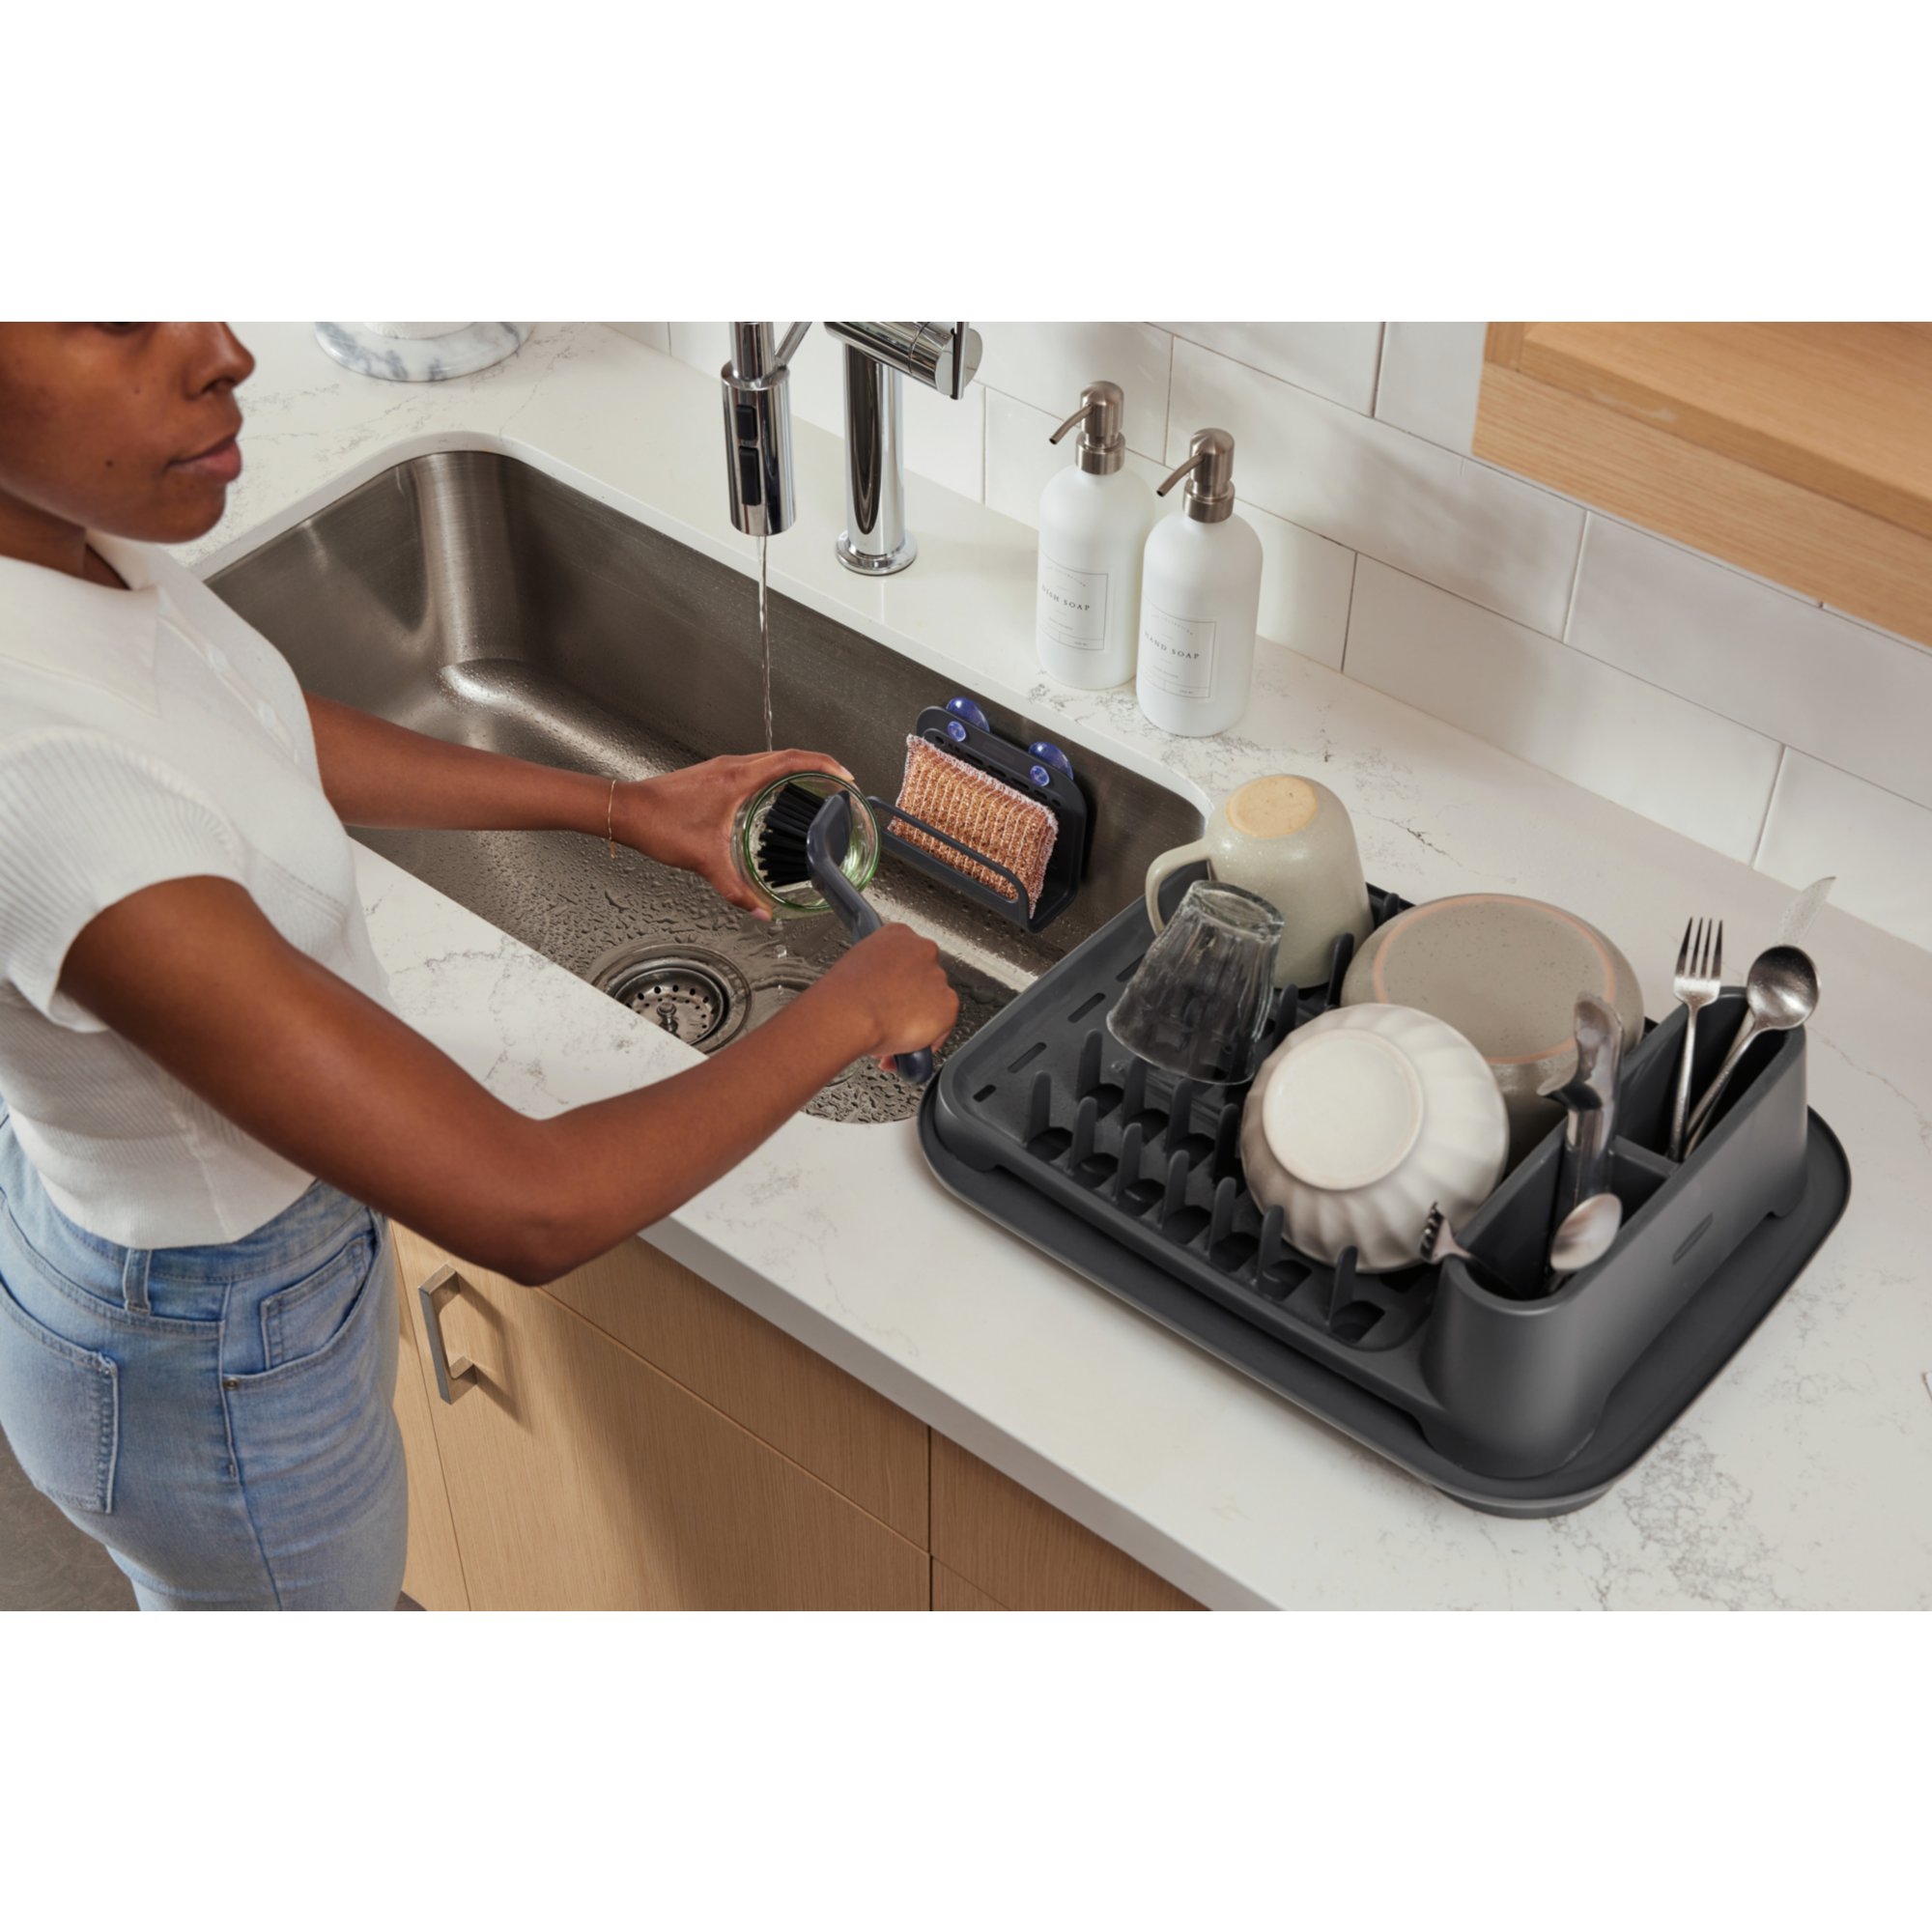 Rubbermaid® Antimicrobial Dish Drying Rack with Drainboard